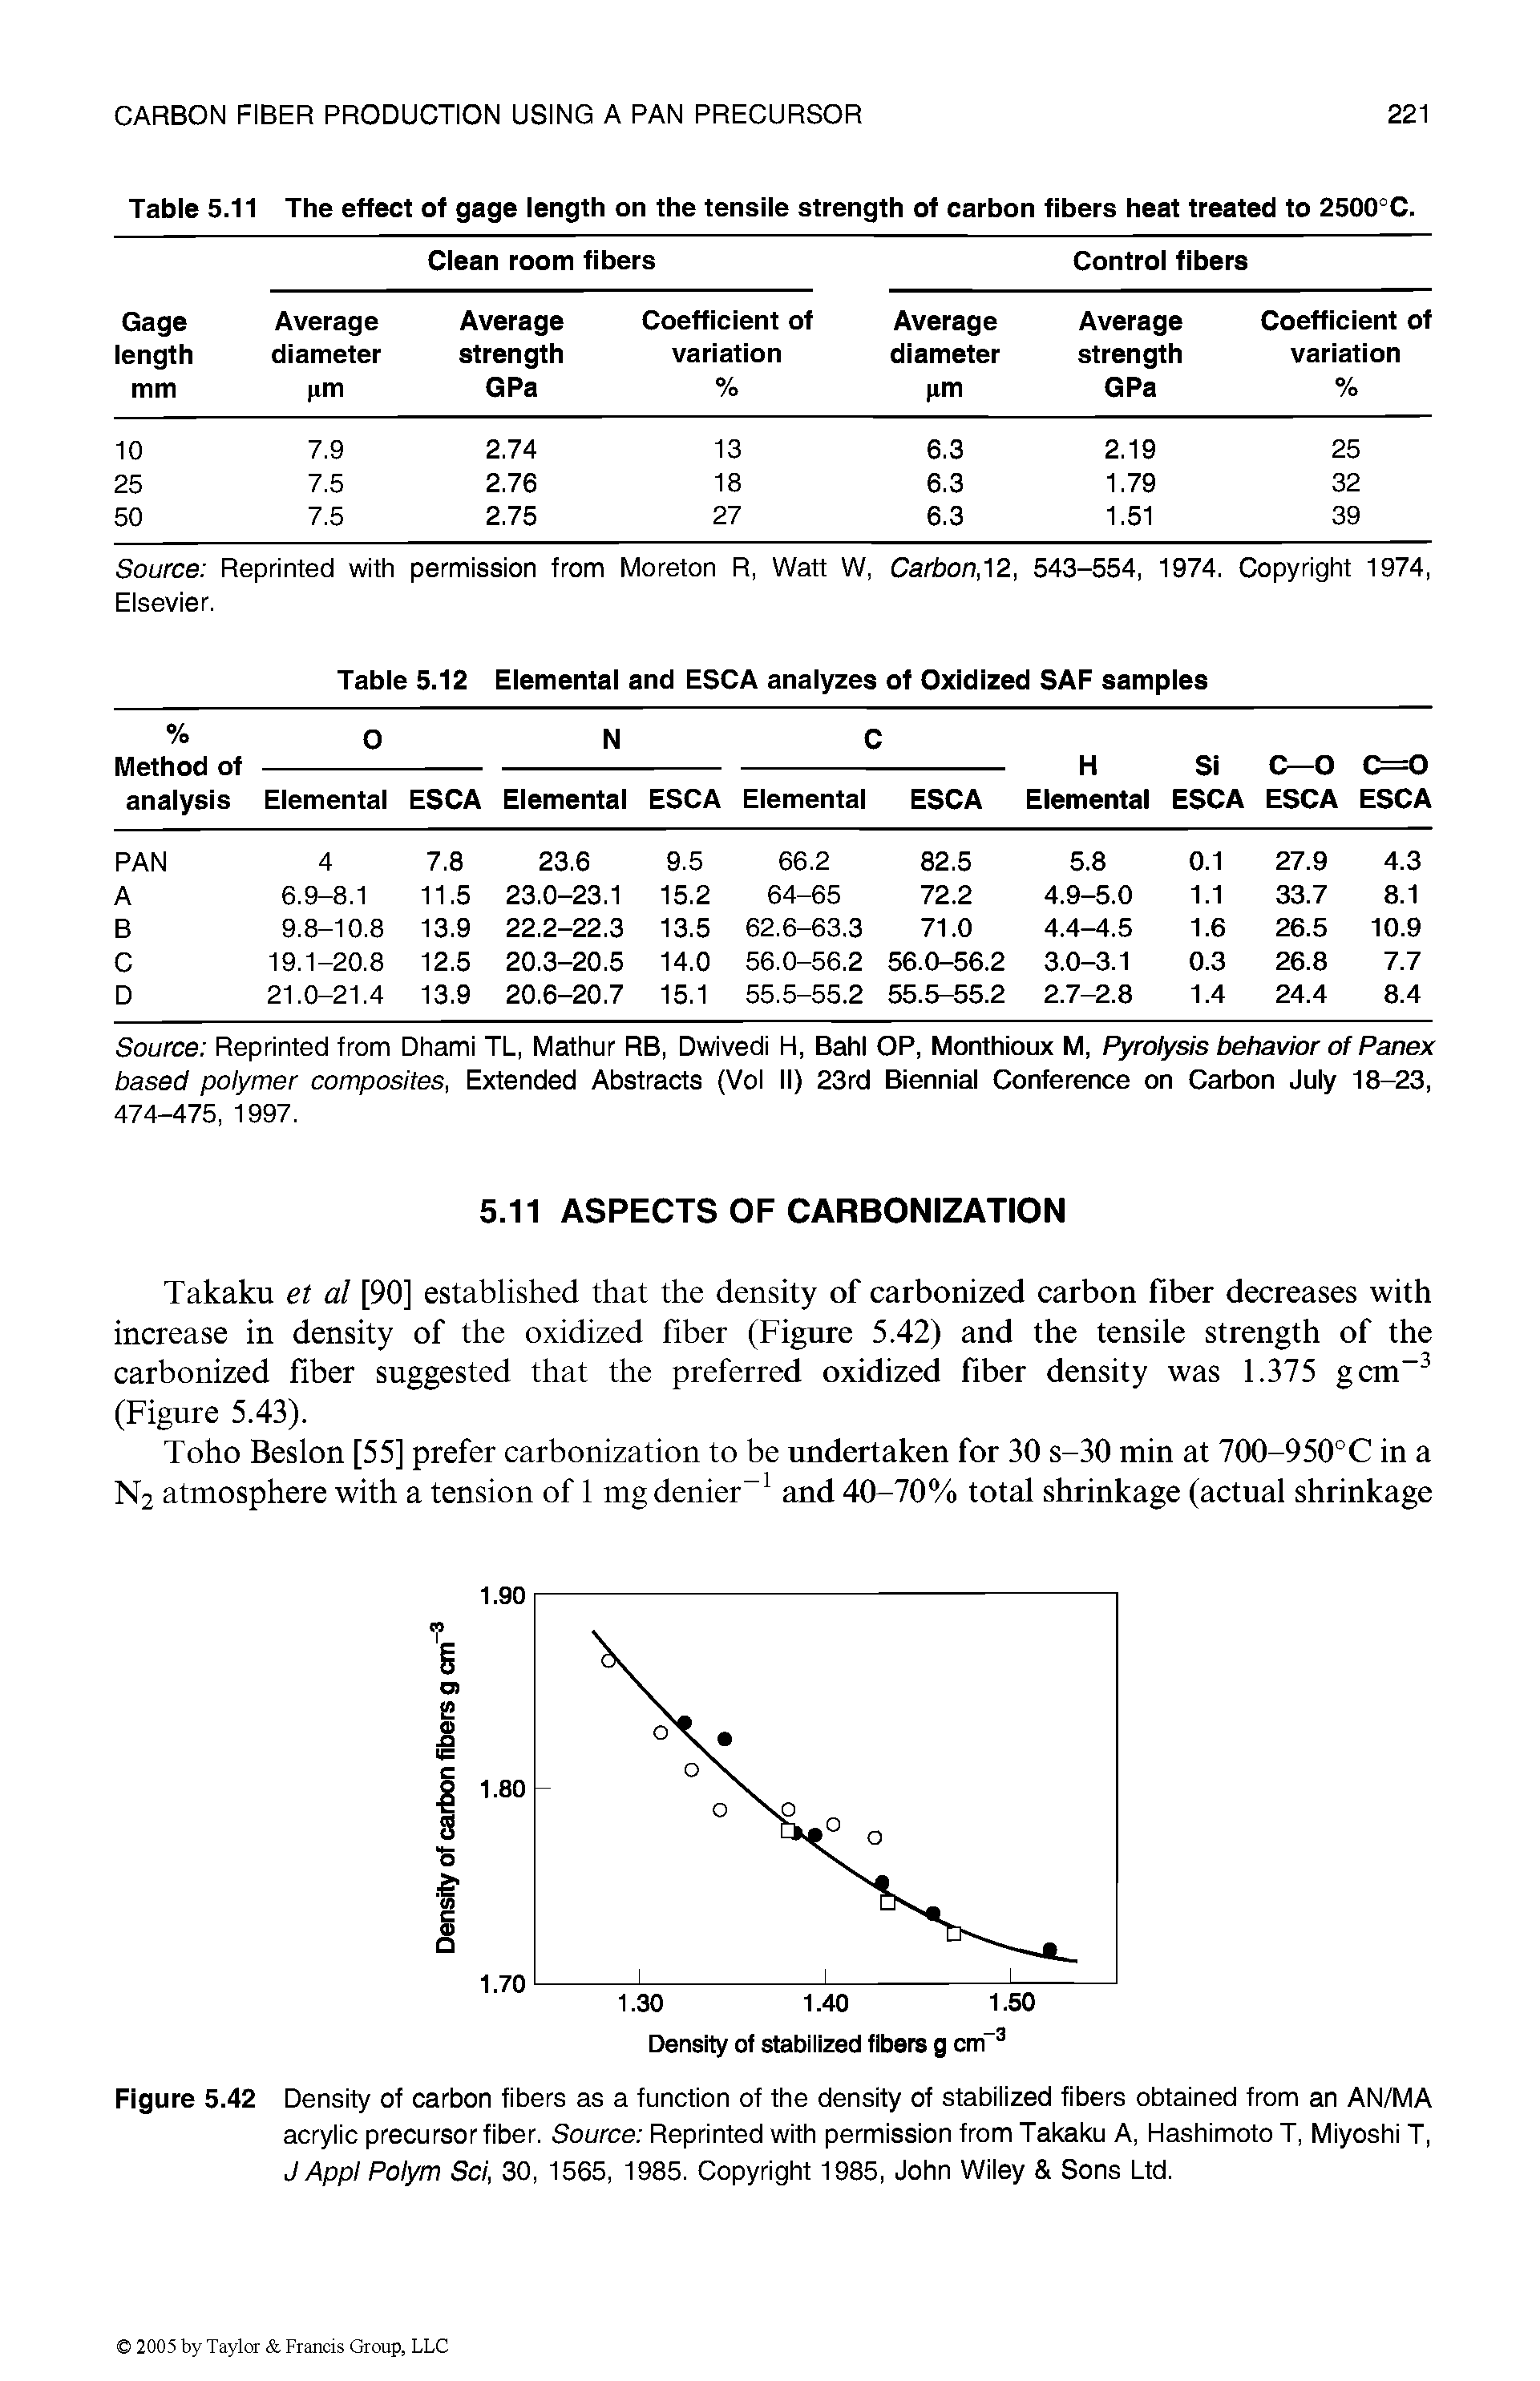 Figure 5.42 Density of carbon fibers as a function of the density of stabilized fibers obtained from an AN/MA acrylic precursor fiber. Source Reprinted with permission from Takaku A, Hashimoto T, Miyoshi T, JAppI Polym Sci, 30, 1565, 1985. Copyright 1985, John Wiley Sons Ltd.